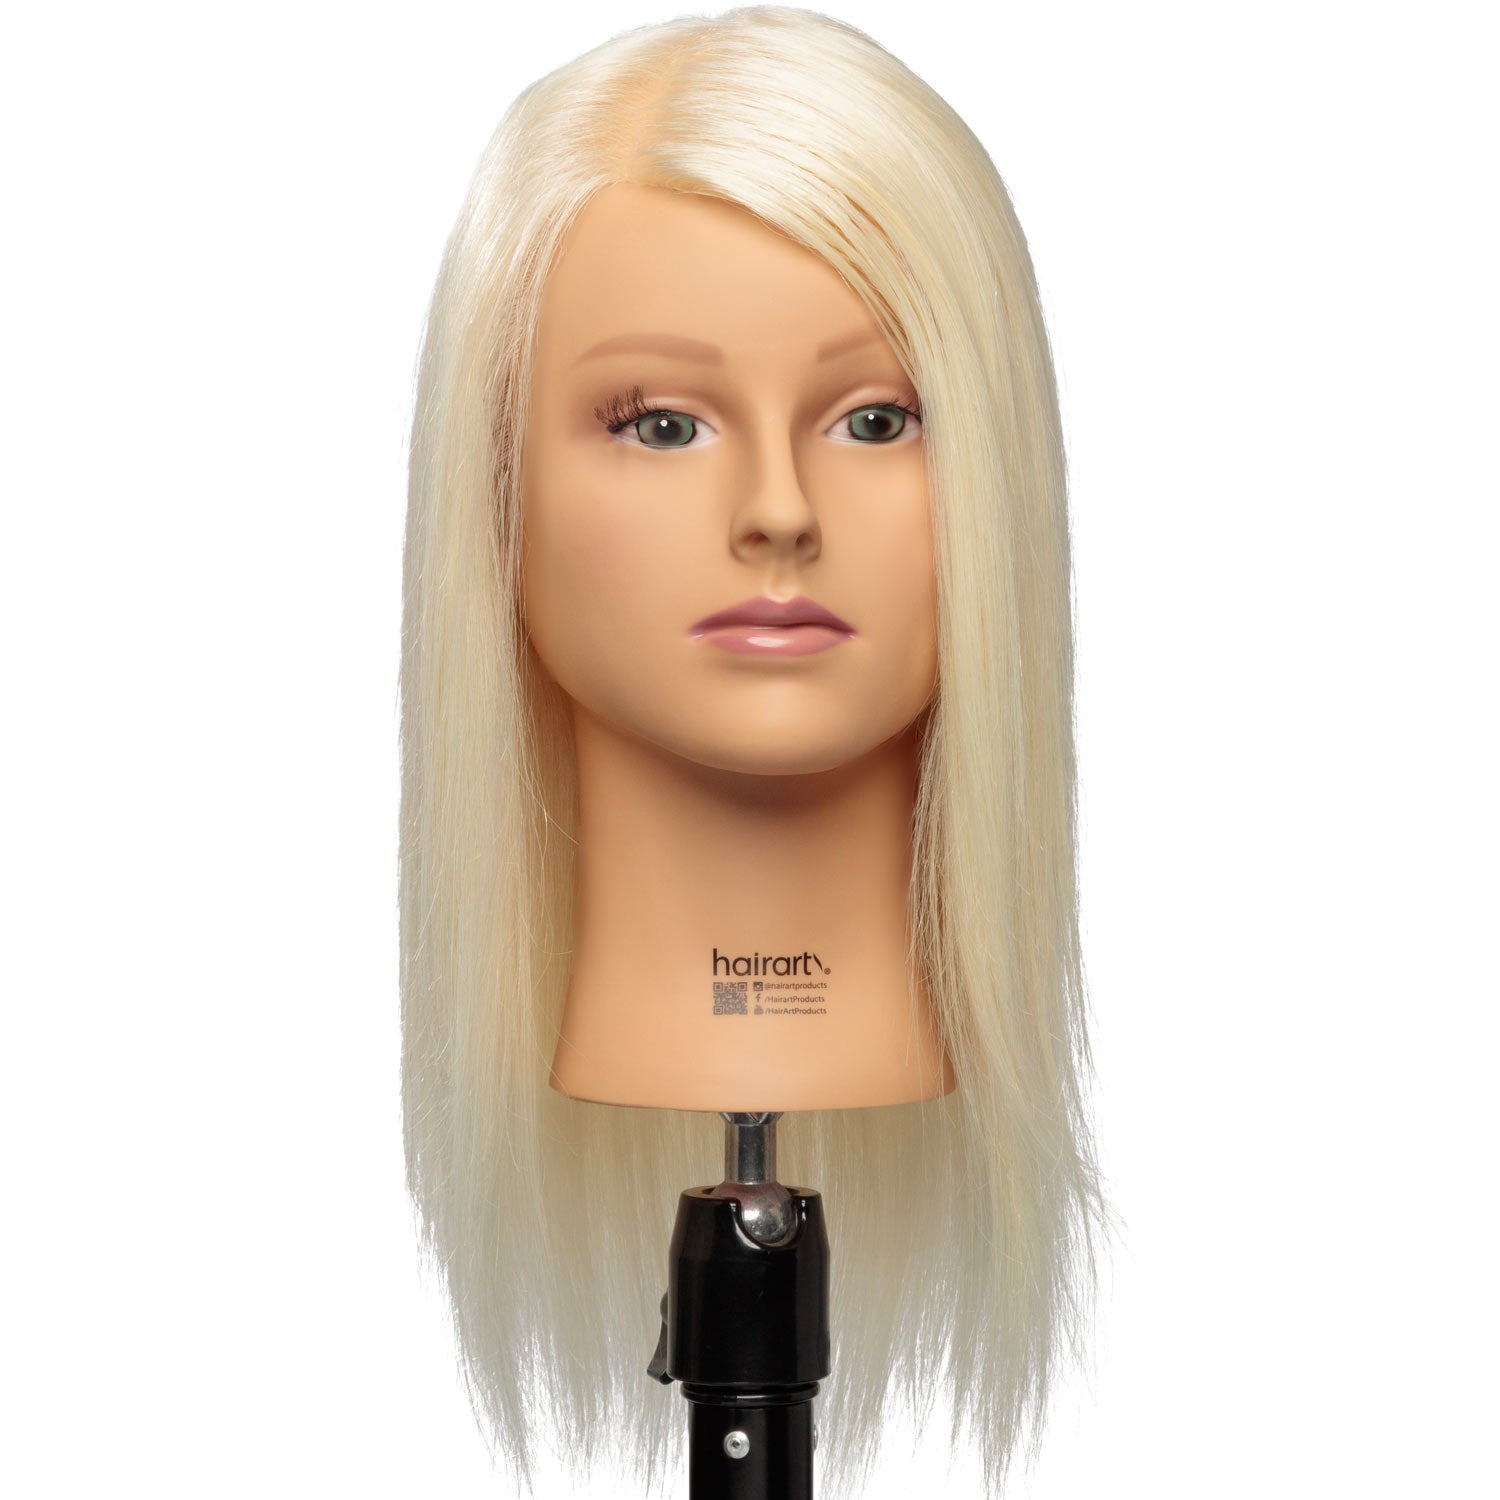 HJ dool head 100% Mannequin Head with Human Hair Manikin Cosmetology Makeup  Doll Heads with Stand for Display Practice Braiding Styling Training